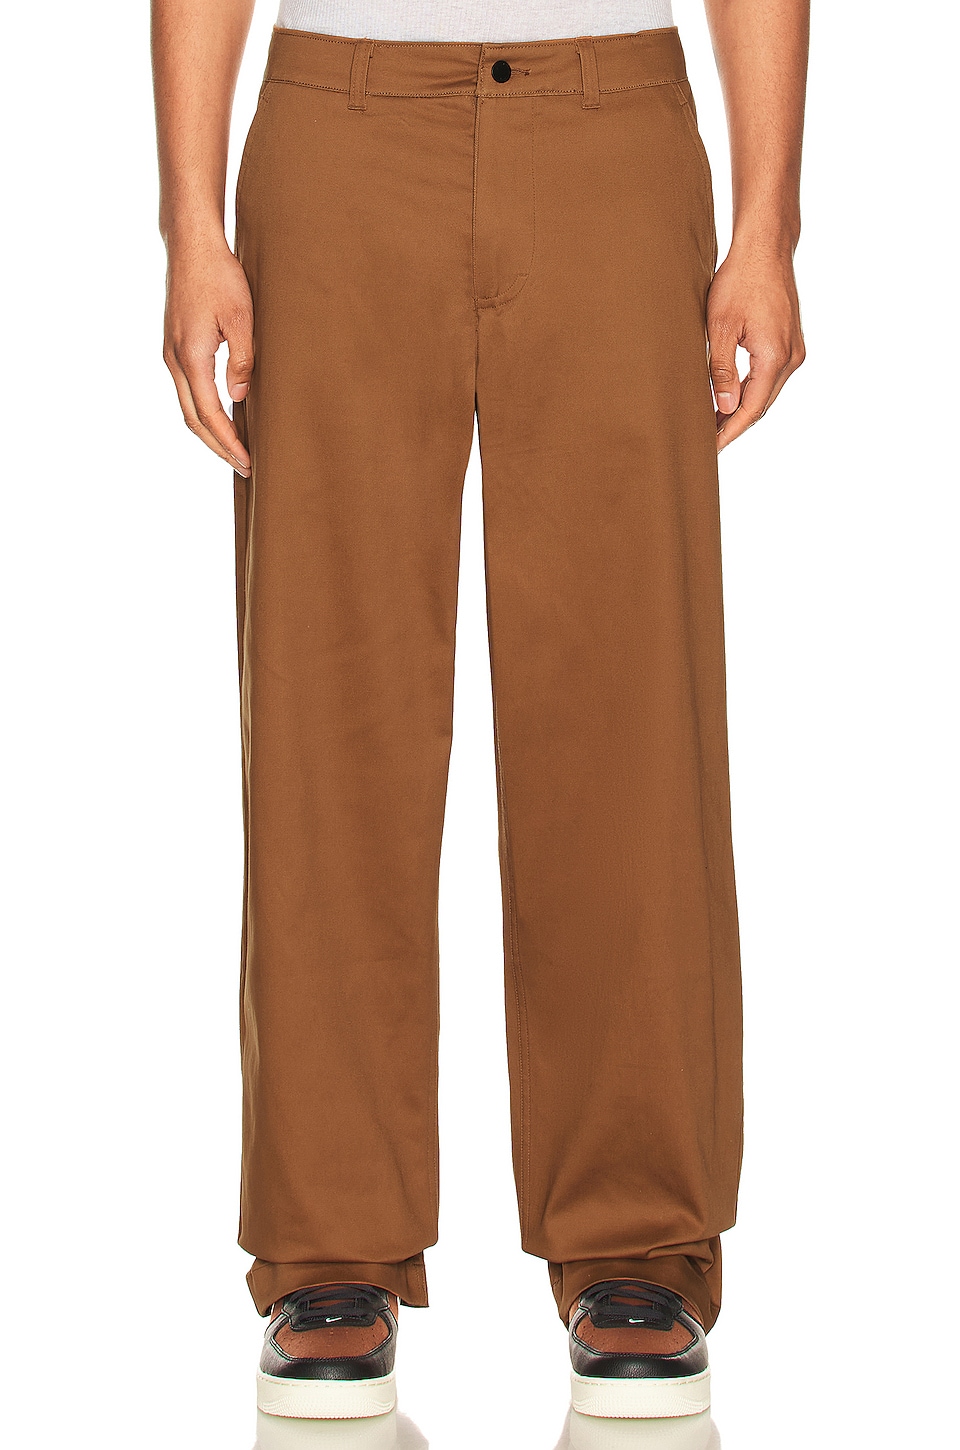 Ale Brown/White Cotton Ul | M Nl REVOLVE Pant Nike El in Chino